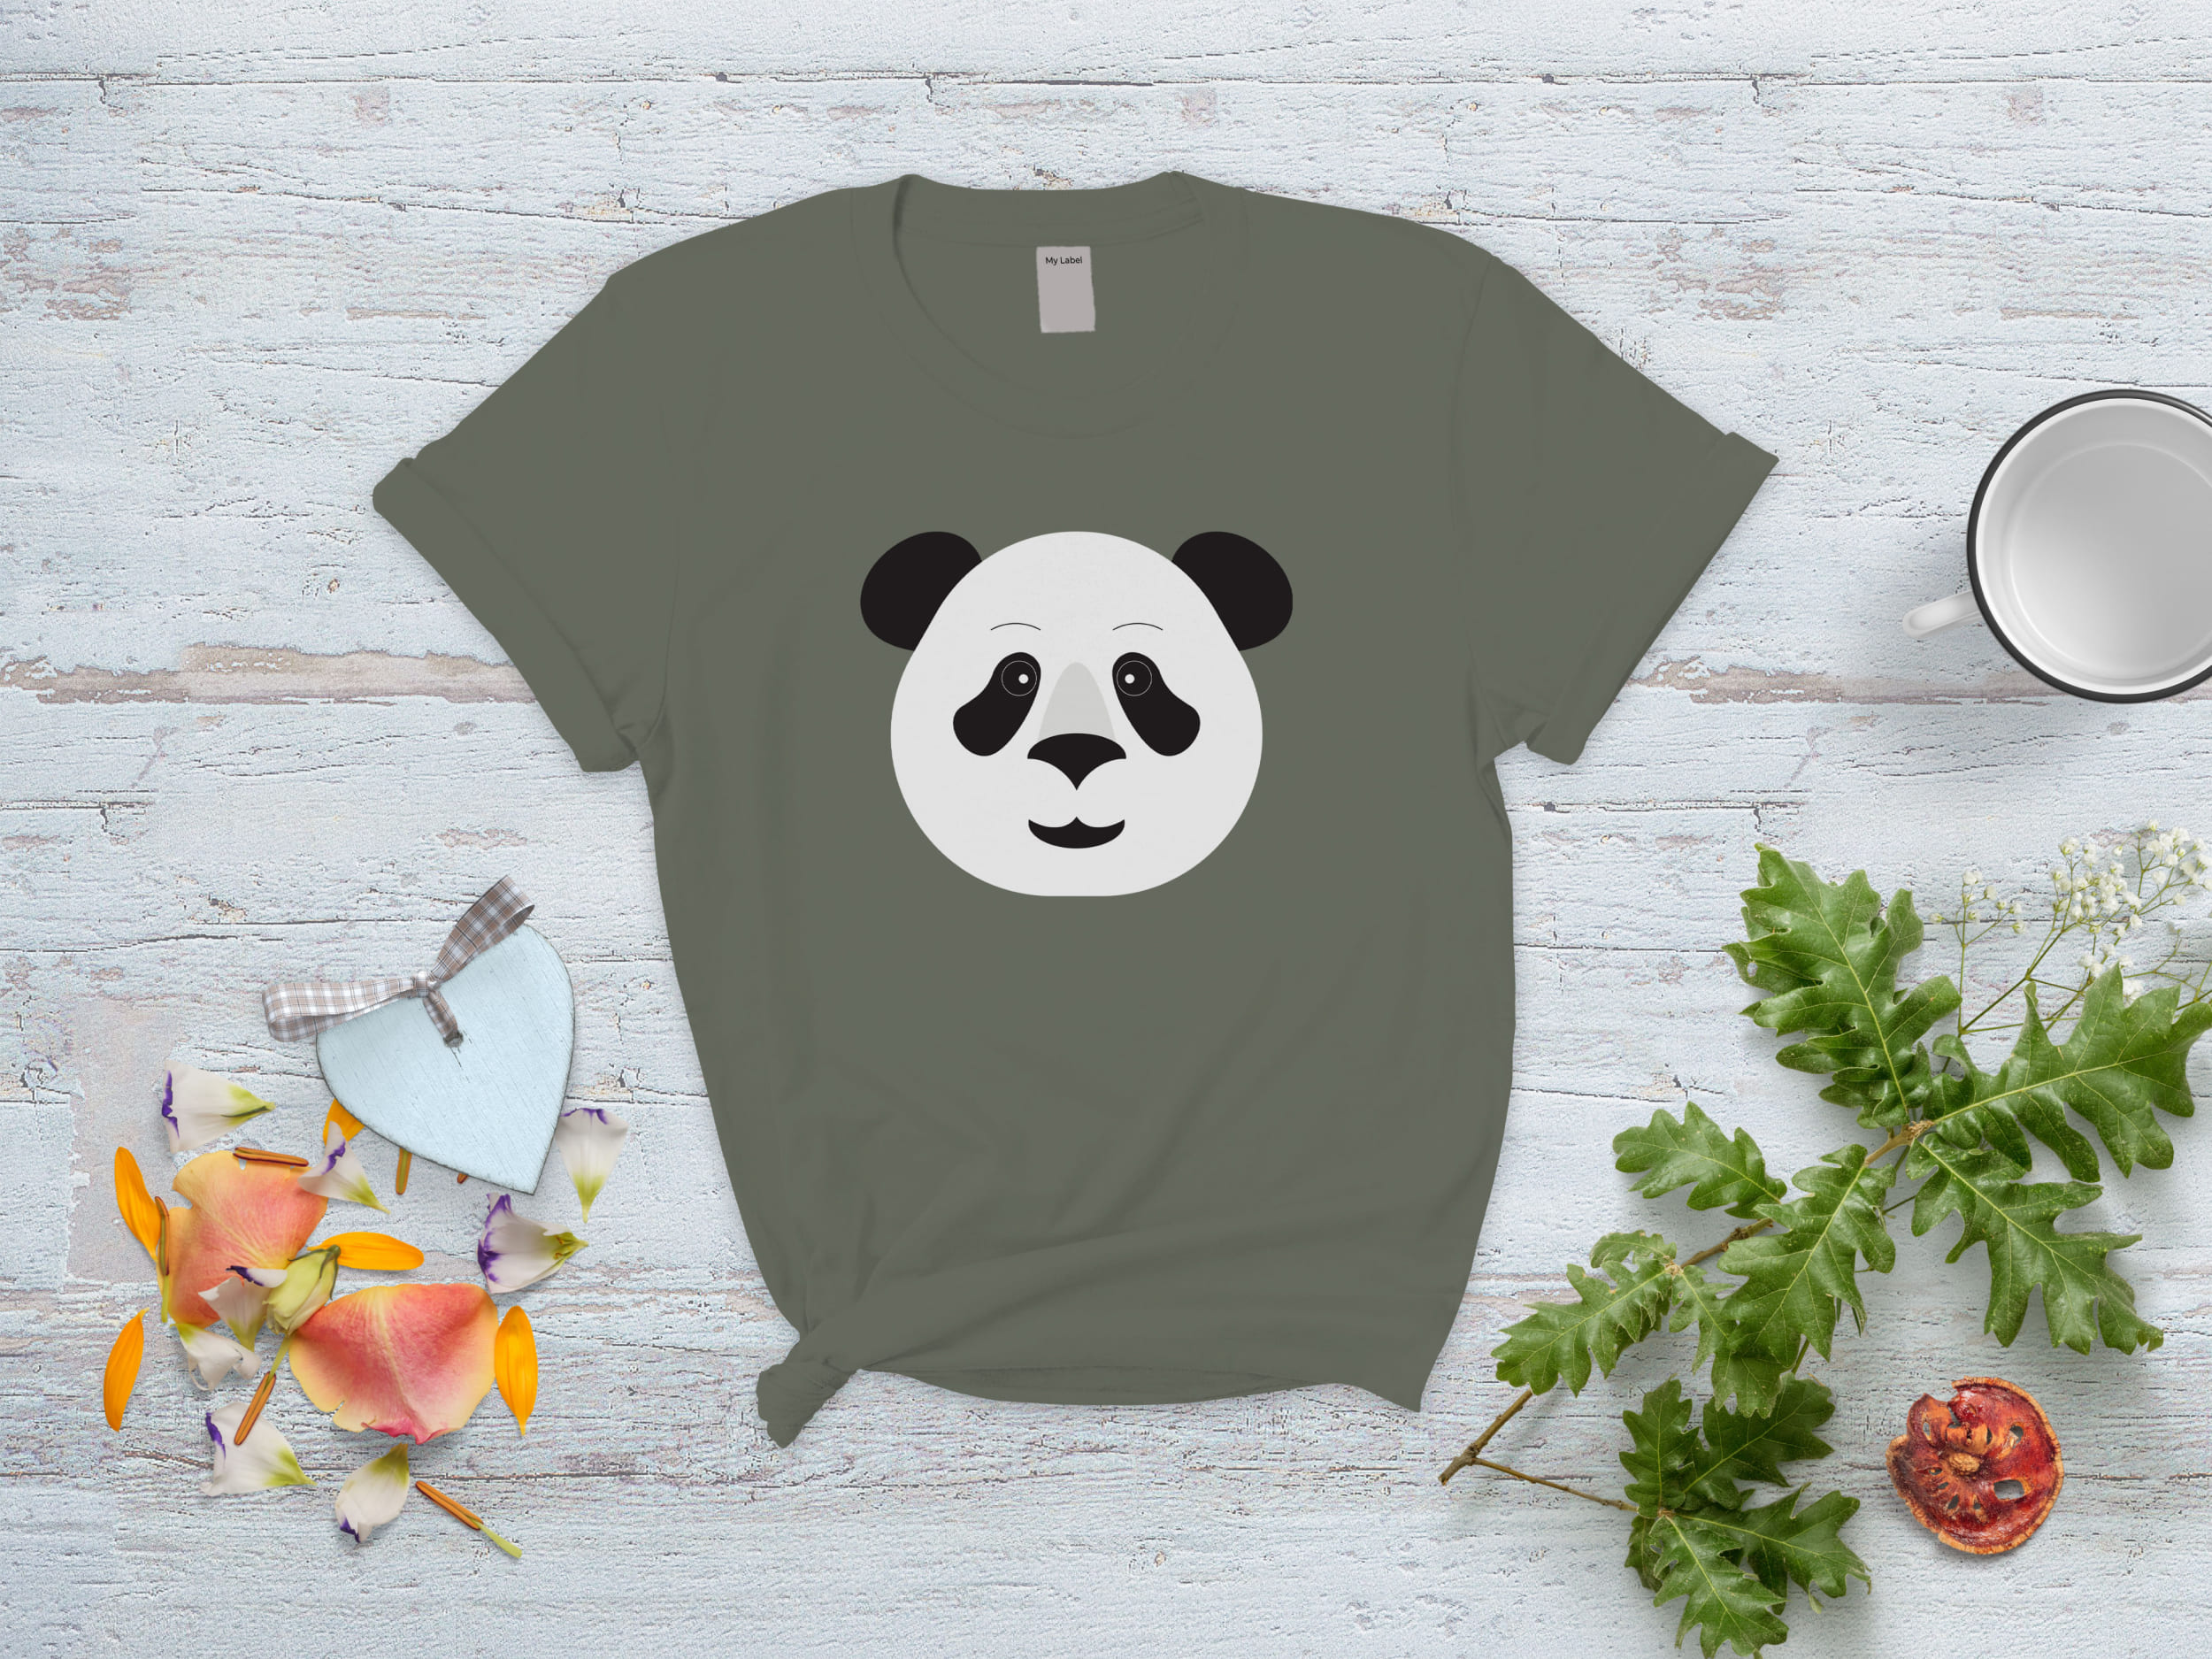 Gray t-shirt with a panda smiling face on a gray and white background with various objects.